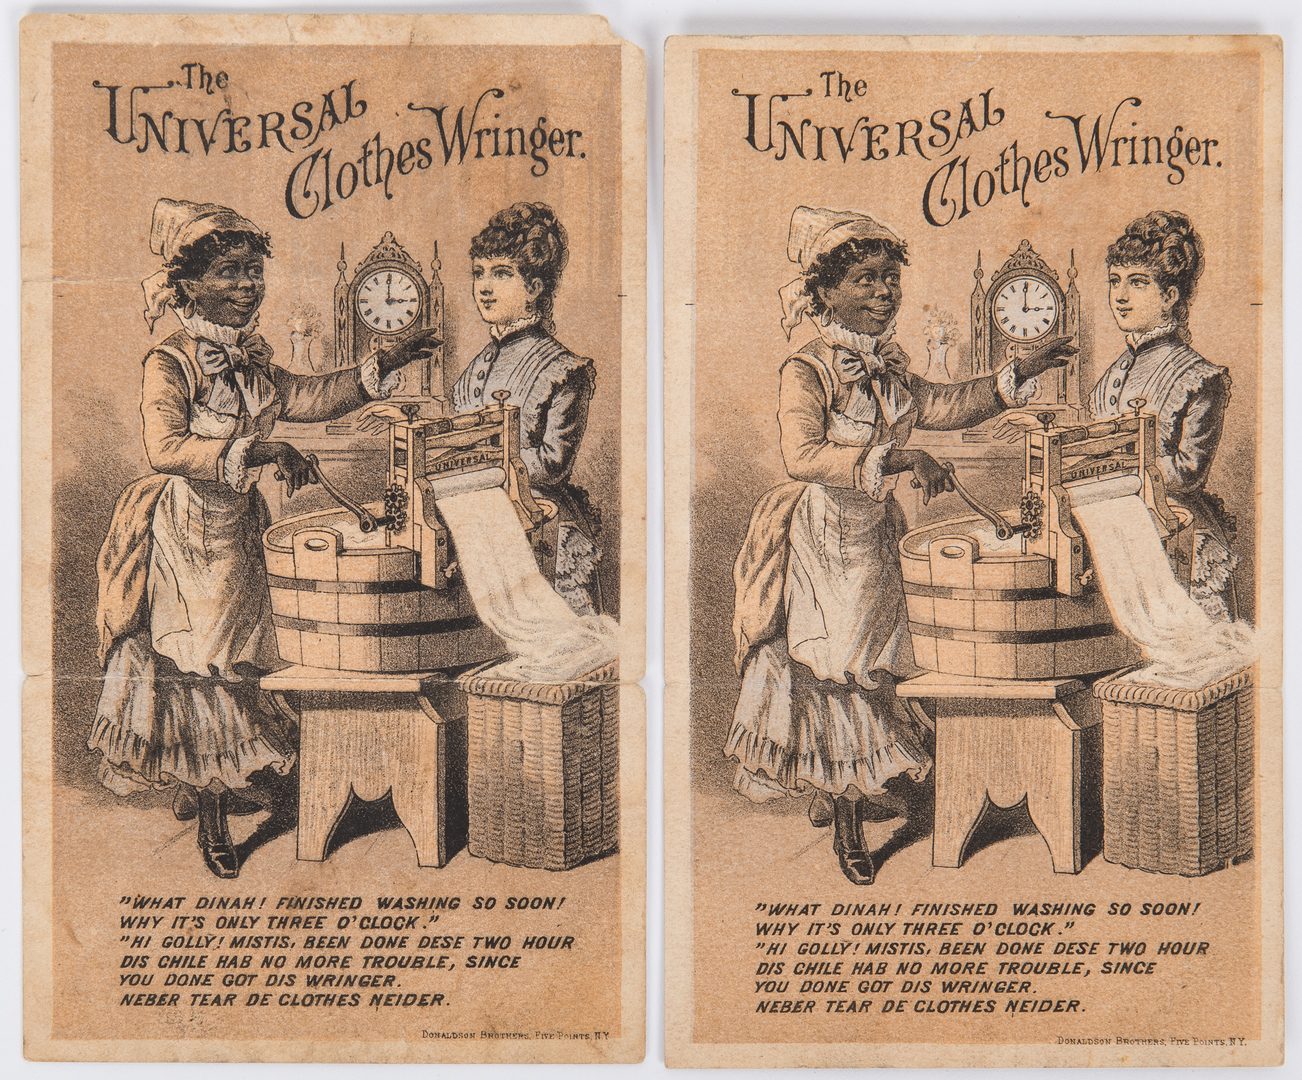 Lot 414: Collection of 767 Trade Cards, incl. Coffee & Cigarette